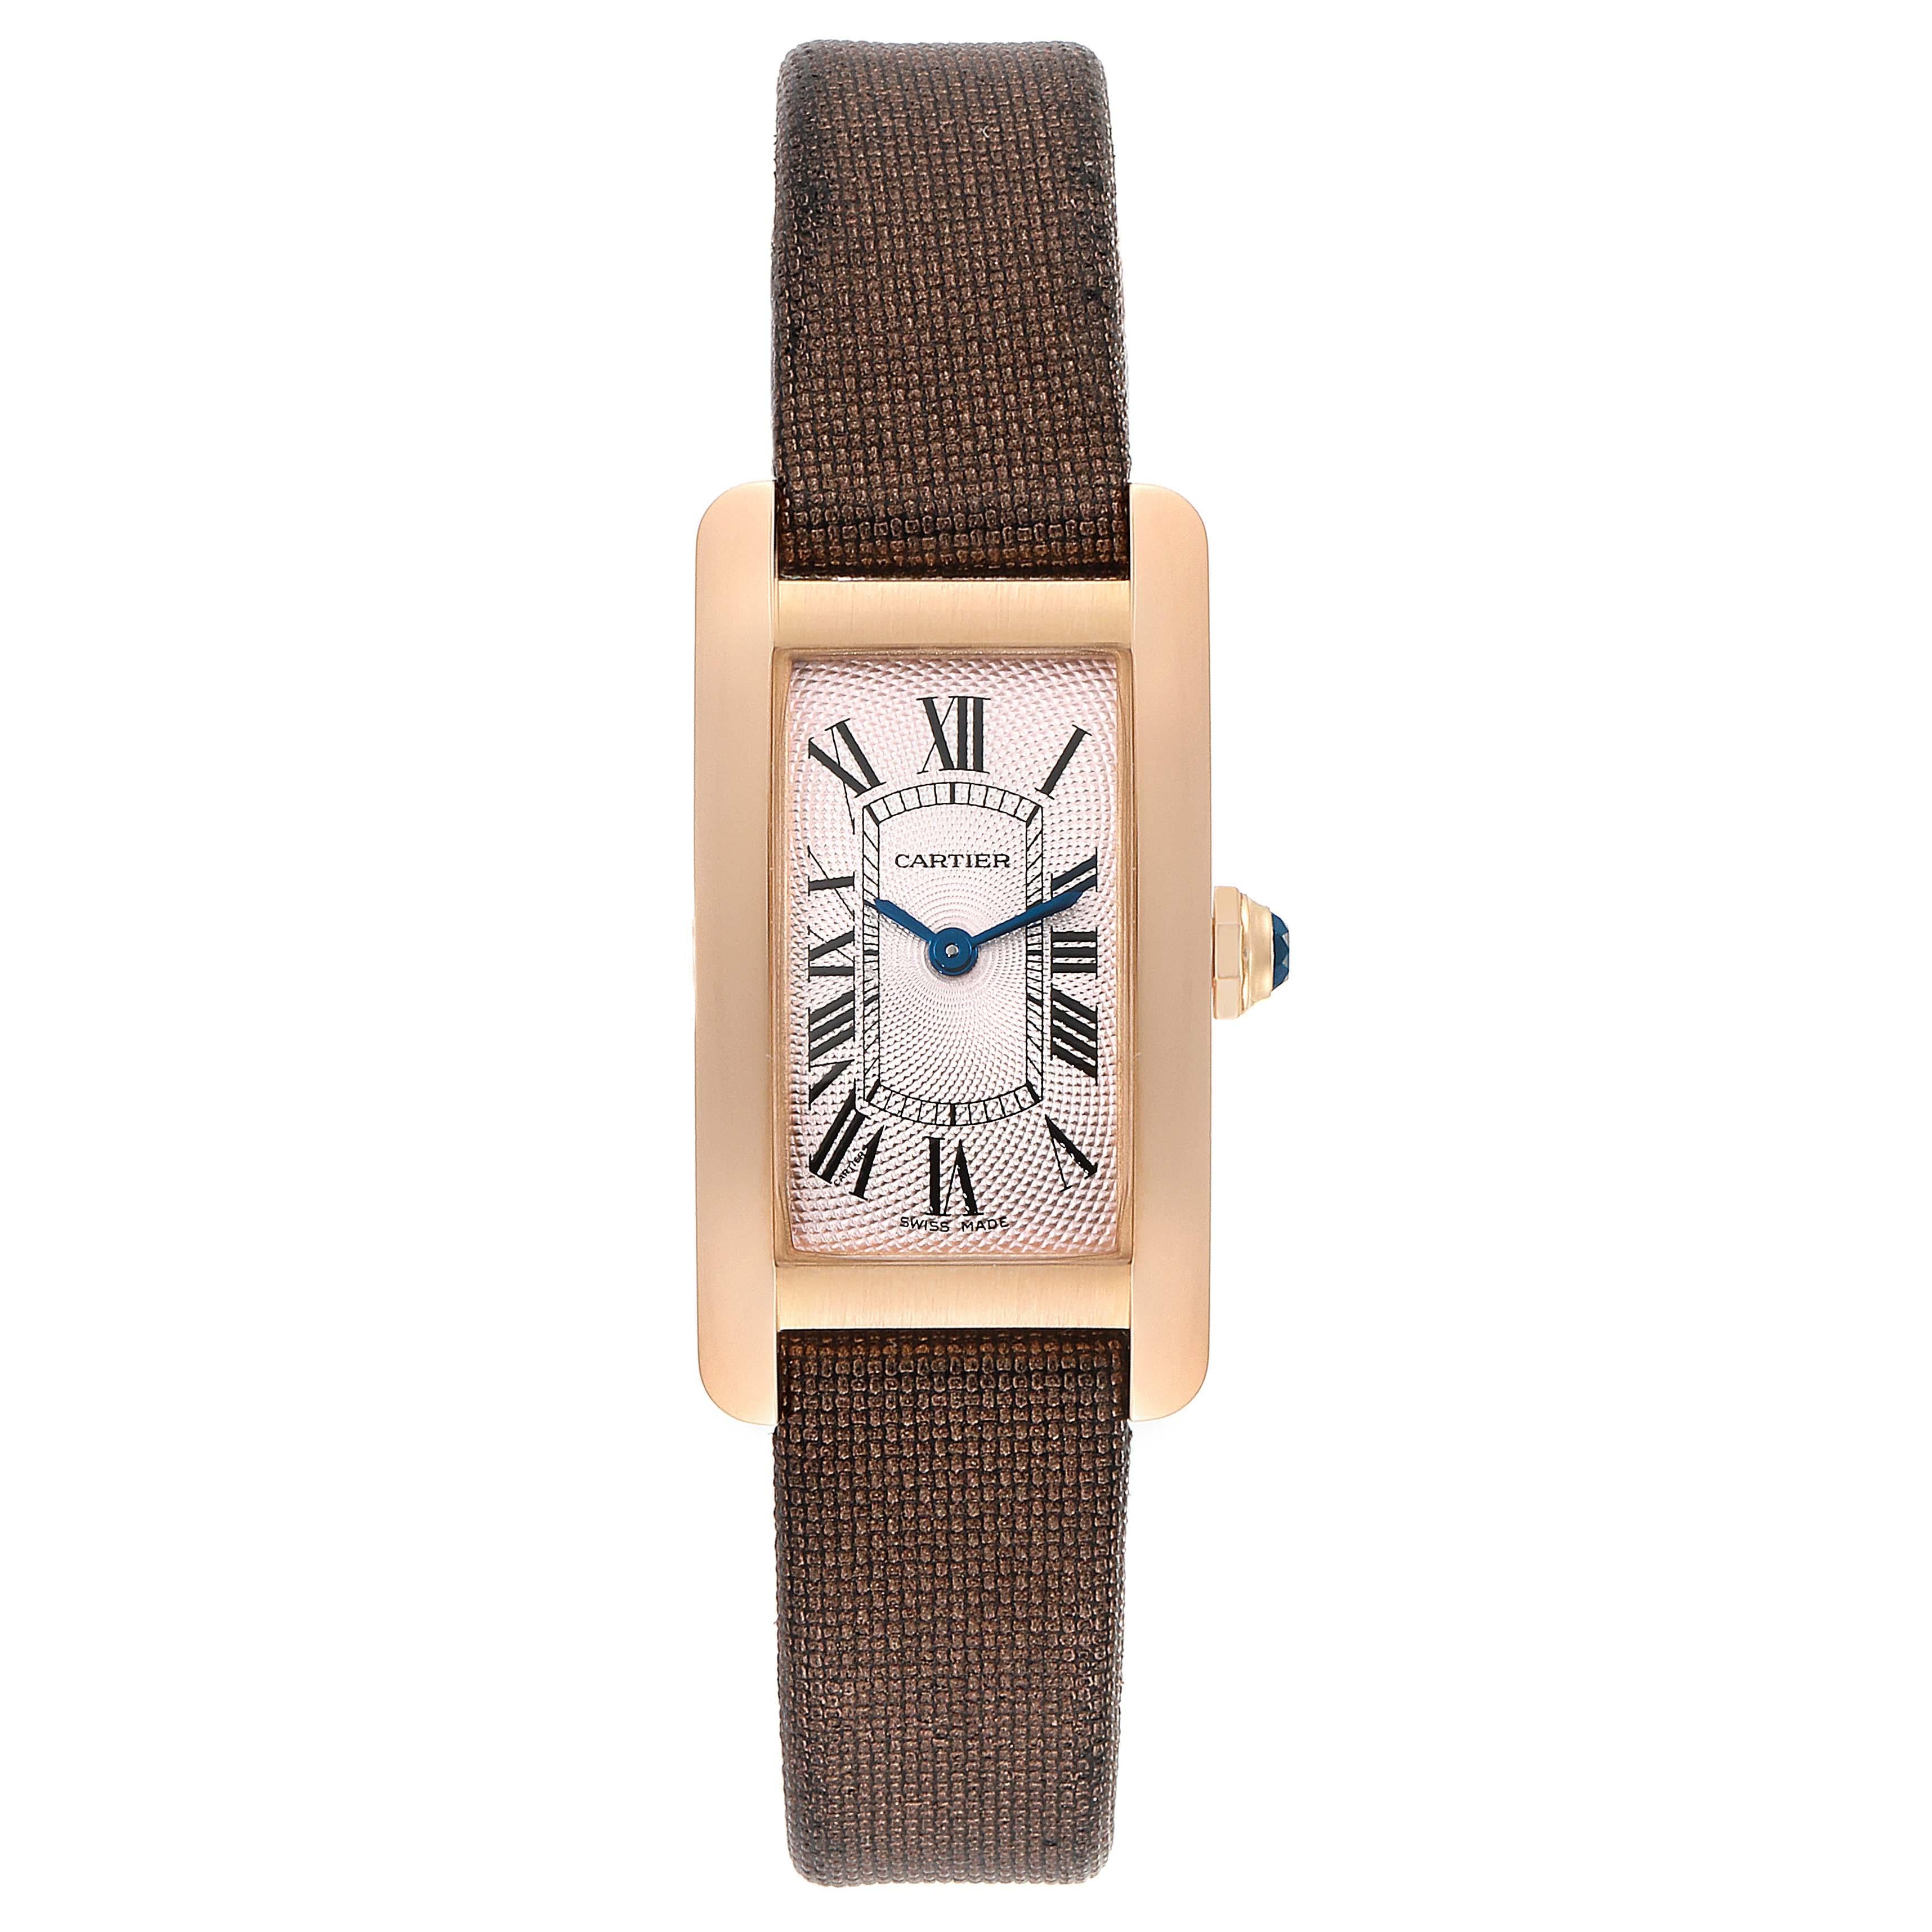 Cartier Tank Americaine Rose Gold Small Ladies Watch 2503. Quartz movement. 18K Rose gold case 19.0 x 28.0 mm. Circular grained crown set with faceted blue sapphire. . Scratch resistant sapphire crystal. Pink textured dial with roman numerals. Sword